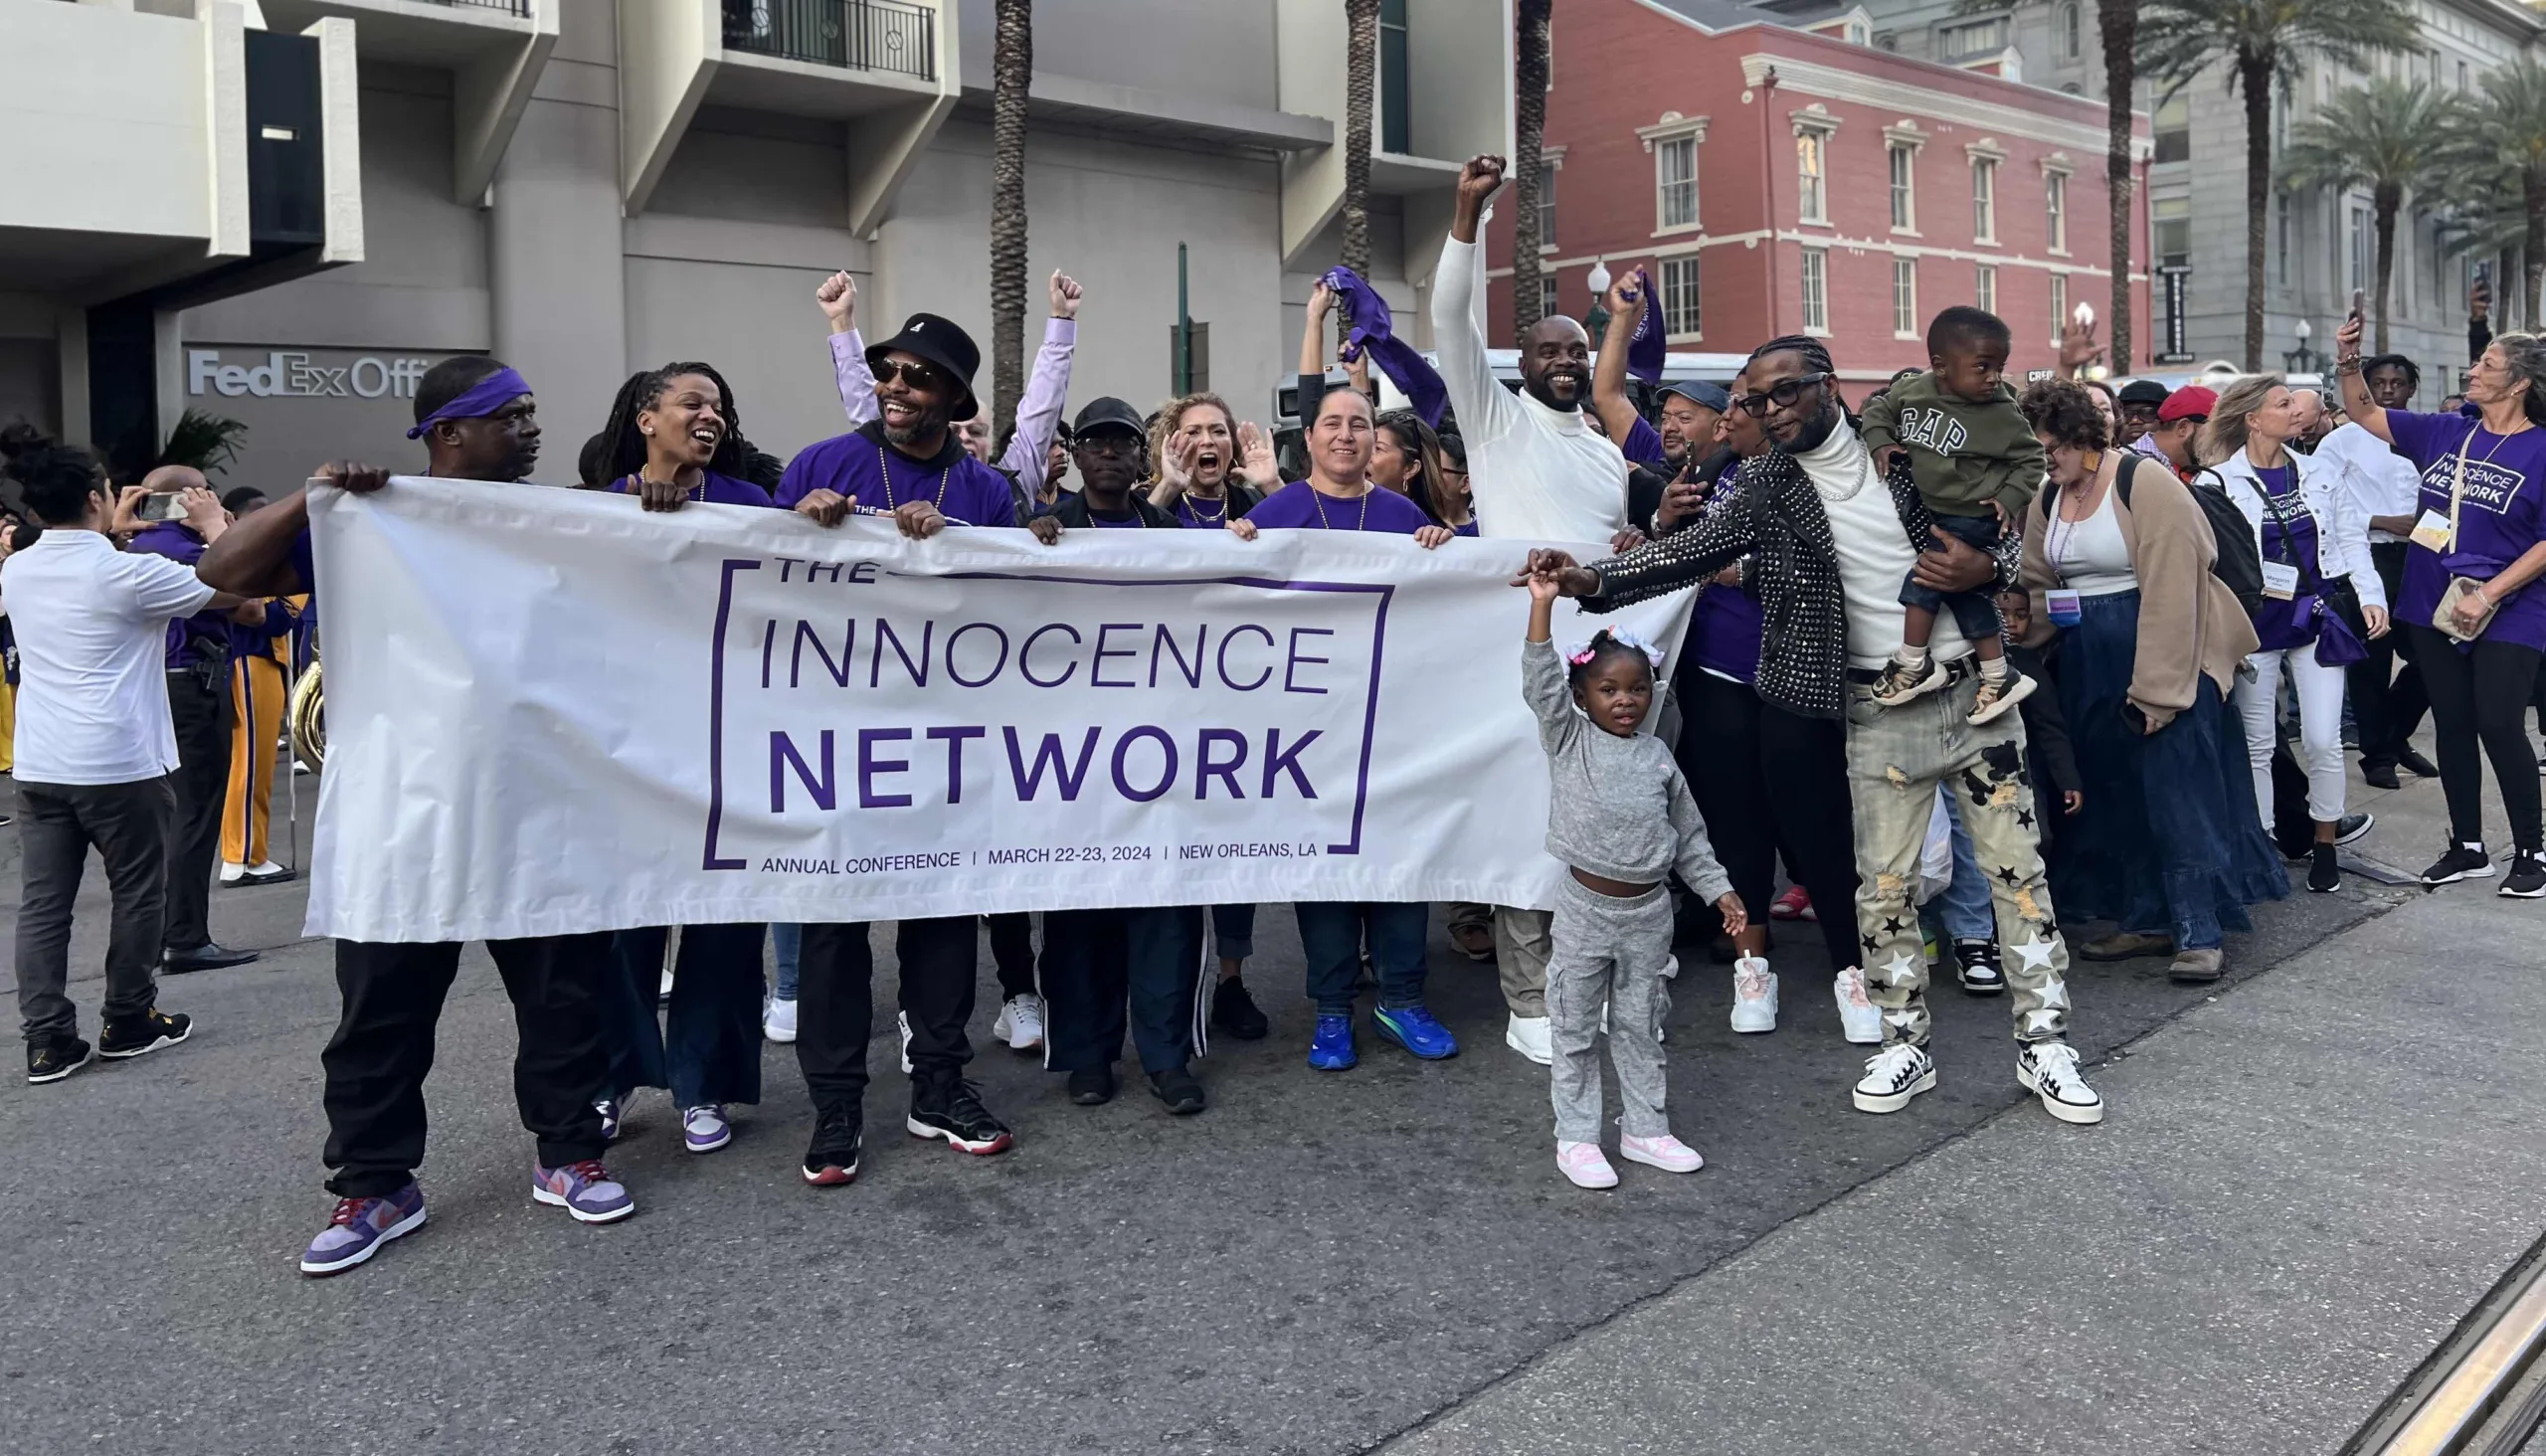 Innocence Network Conference leaders including Rodney Roberts, Termaine Hicks, Anna Vasquez, Robert Jones, and Jerome Morgan at the Freedom Parade in New Orleans. (Image: Alicia Maule/Innocence Project)